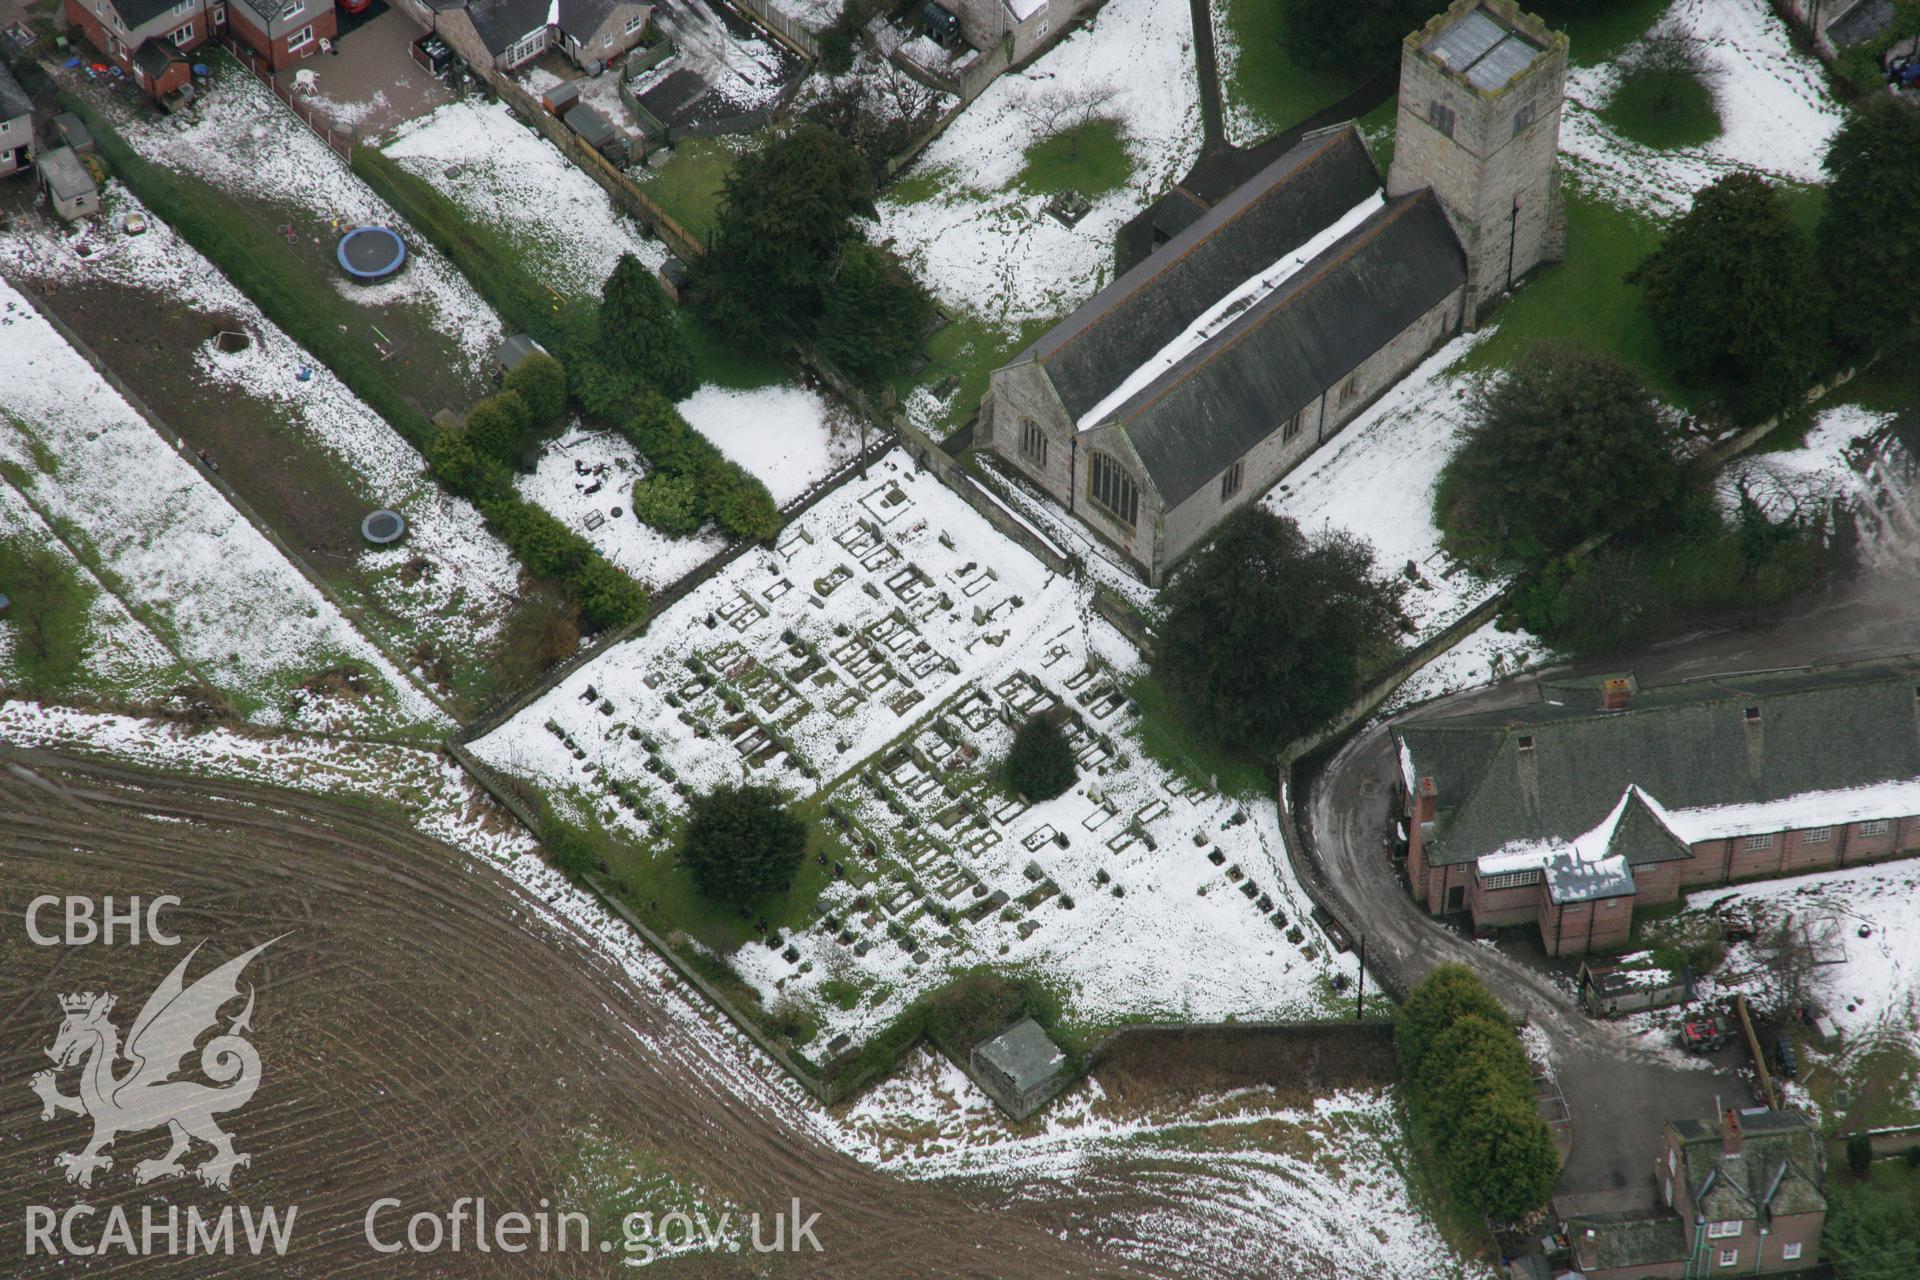 RCAHMW colour oblique aerial photograph of St Cynfarch and St Mary's Church, Llanfair Dyffryn Clwyd, showing the graveyard under snow. Taken on 06 March 2006 by Toby Driver.